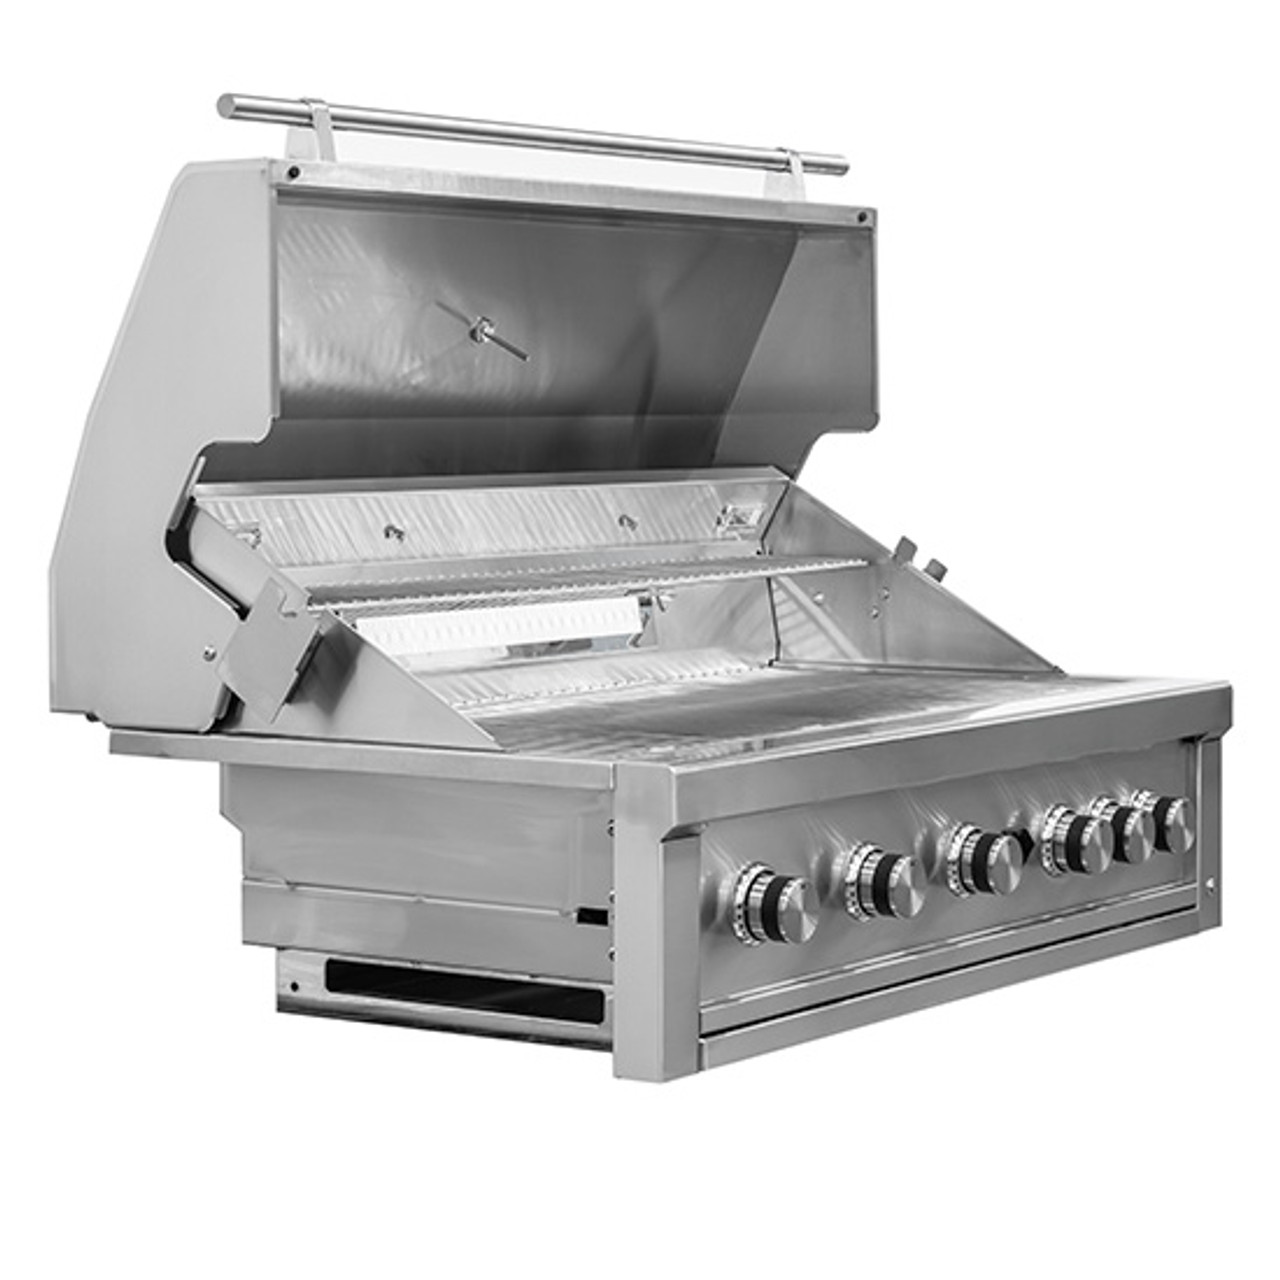 54 Outdoor Gas Grill